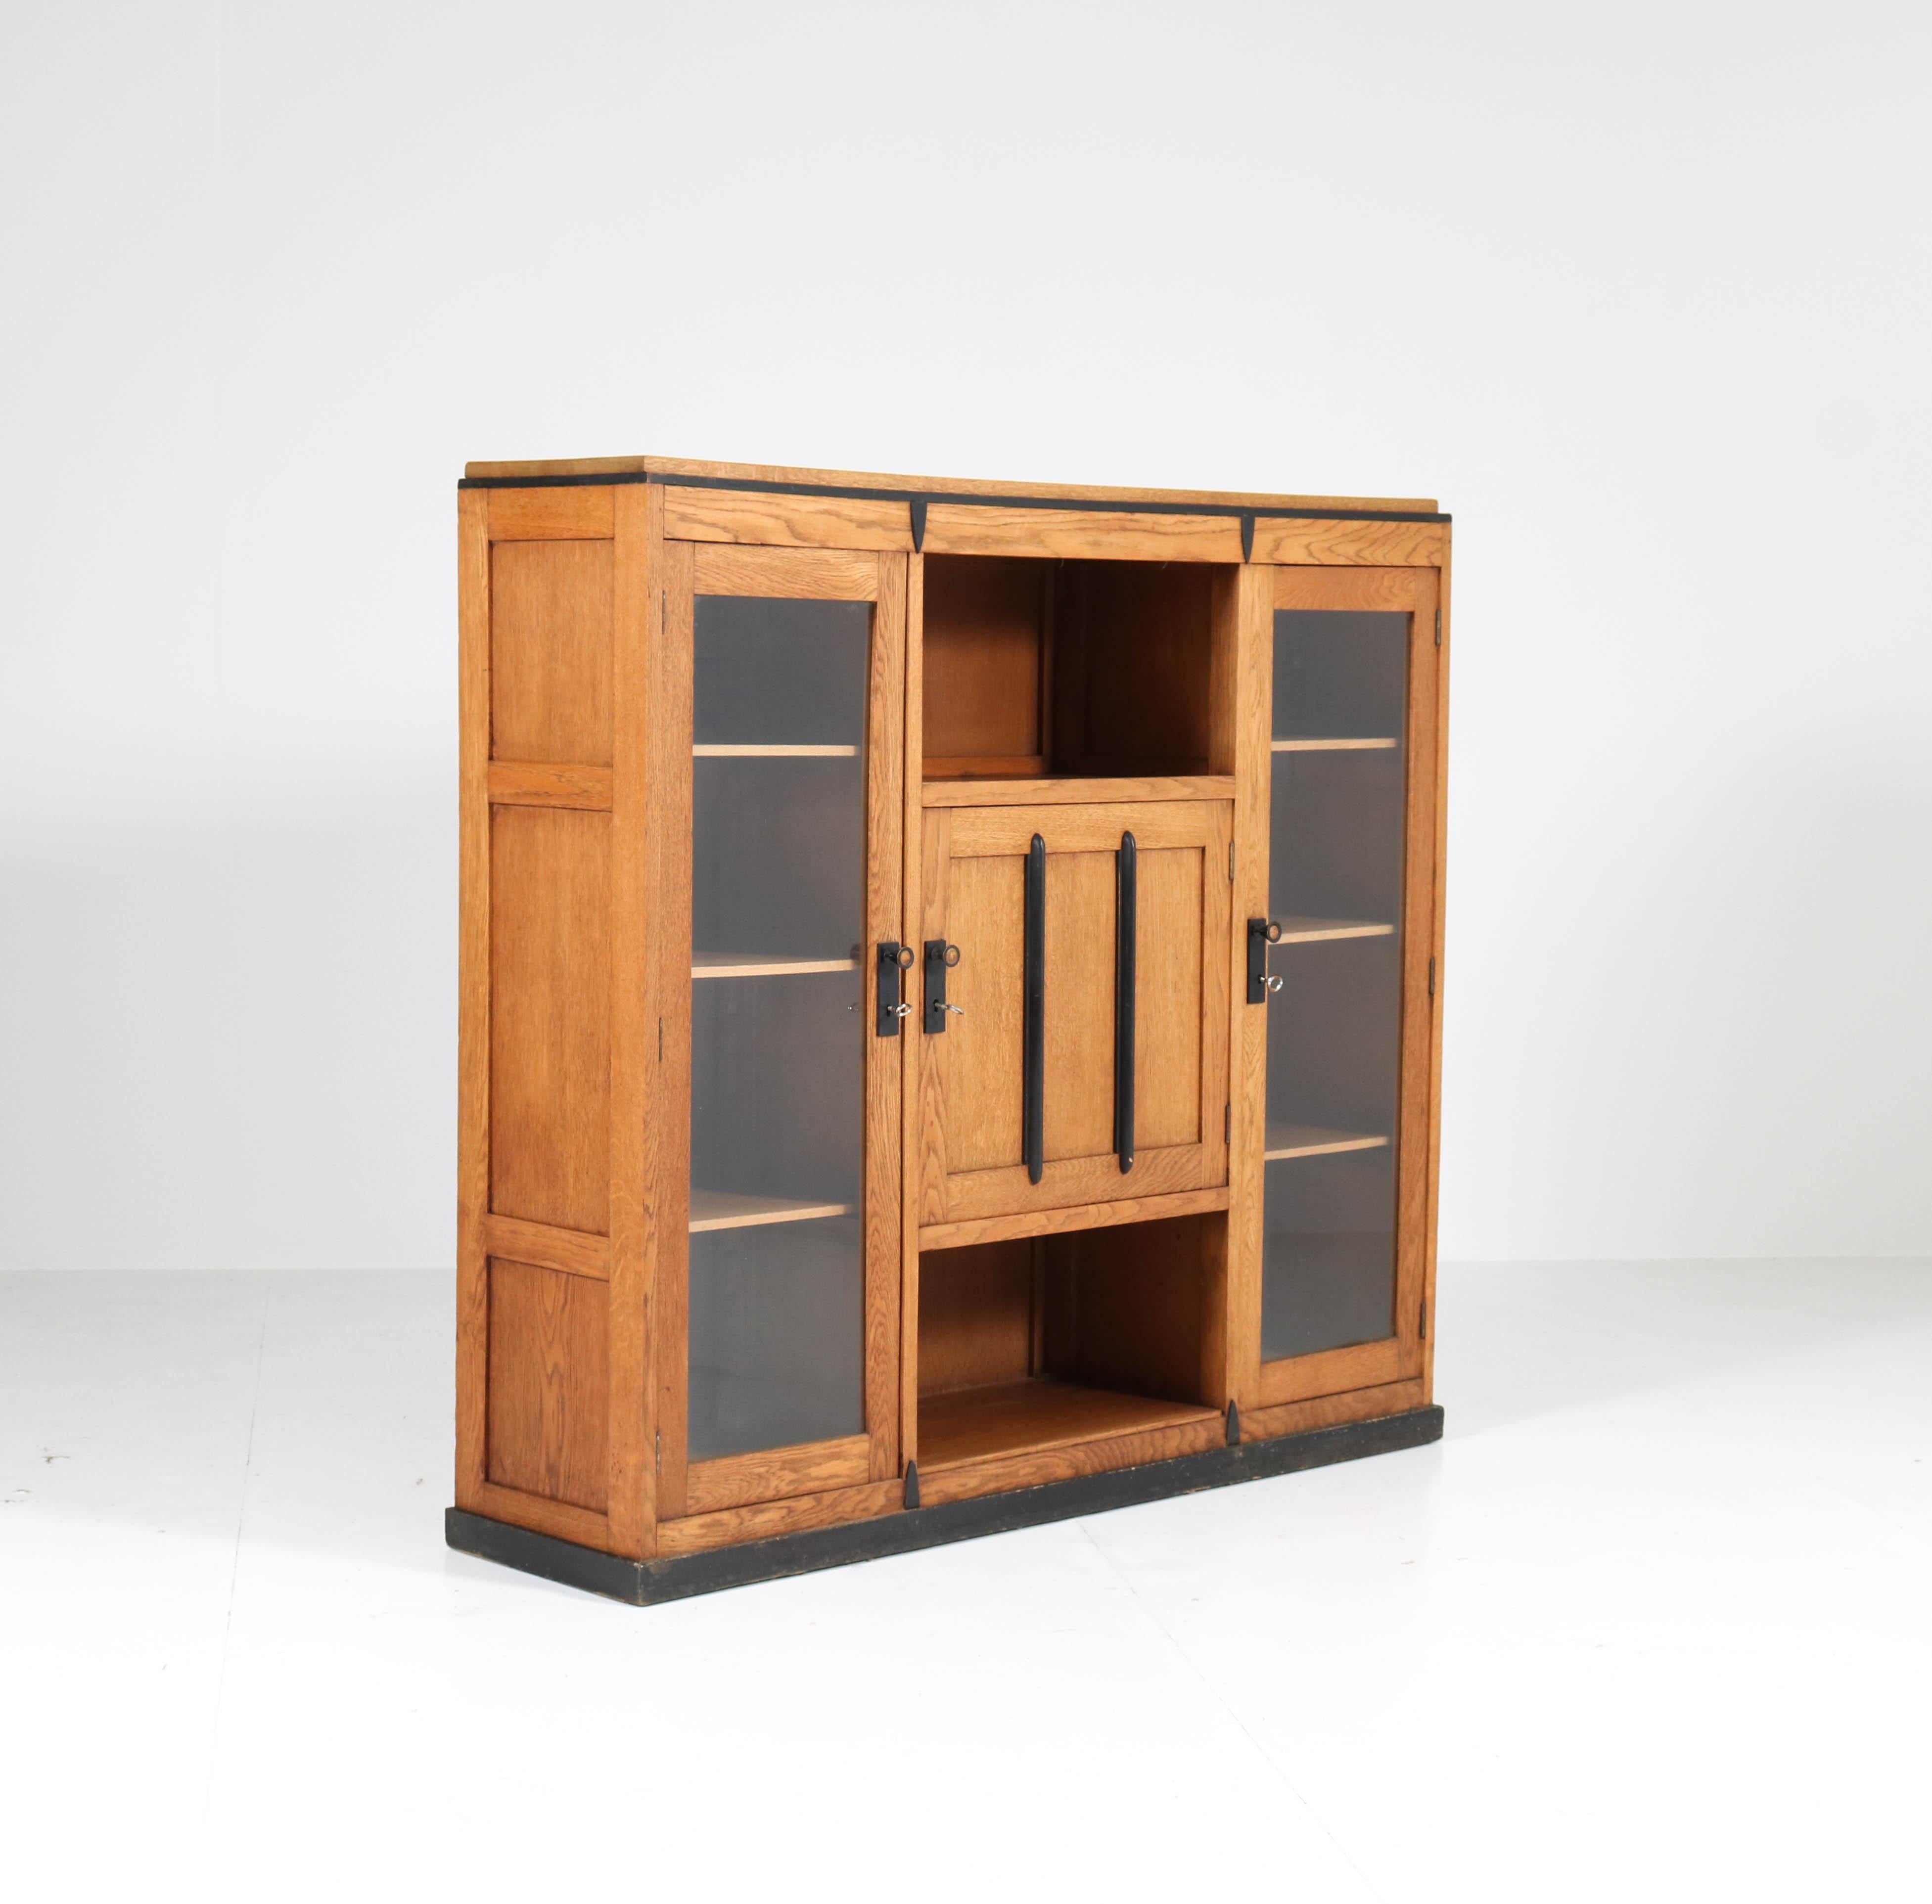 Wonderful and rare Art Deco Amsterdam School bookcase.
Striking Dutch design from the 1920s.
Solid oak with original ebonized lining.
Seven original oak shelves, adjustable in height.
In good original condition with minor wear consistent with